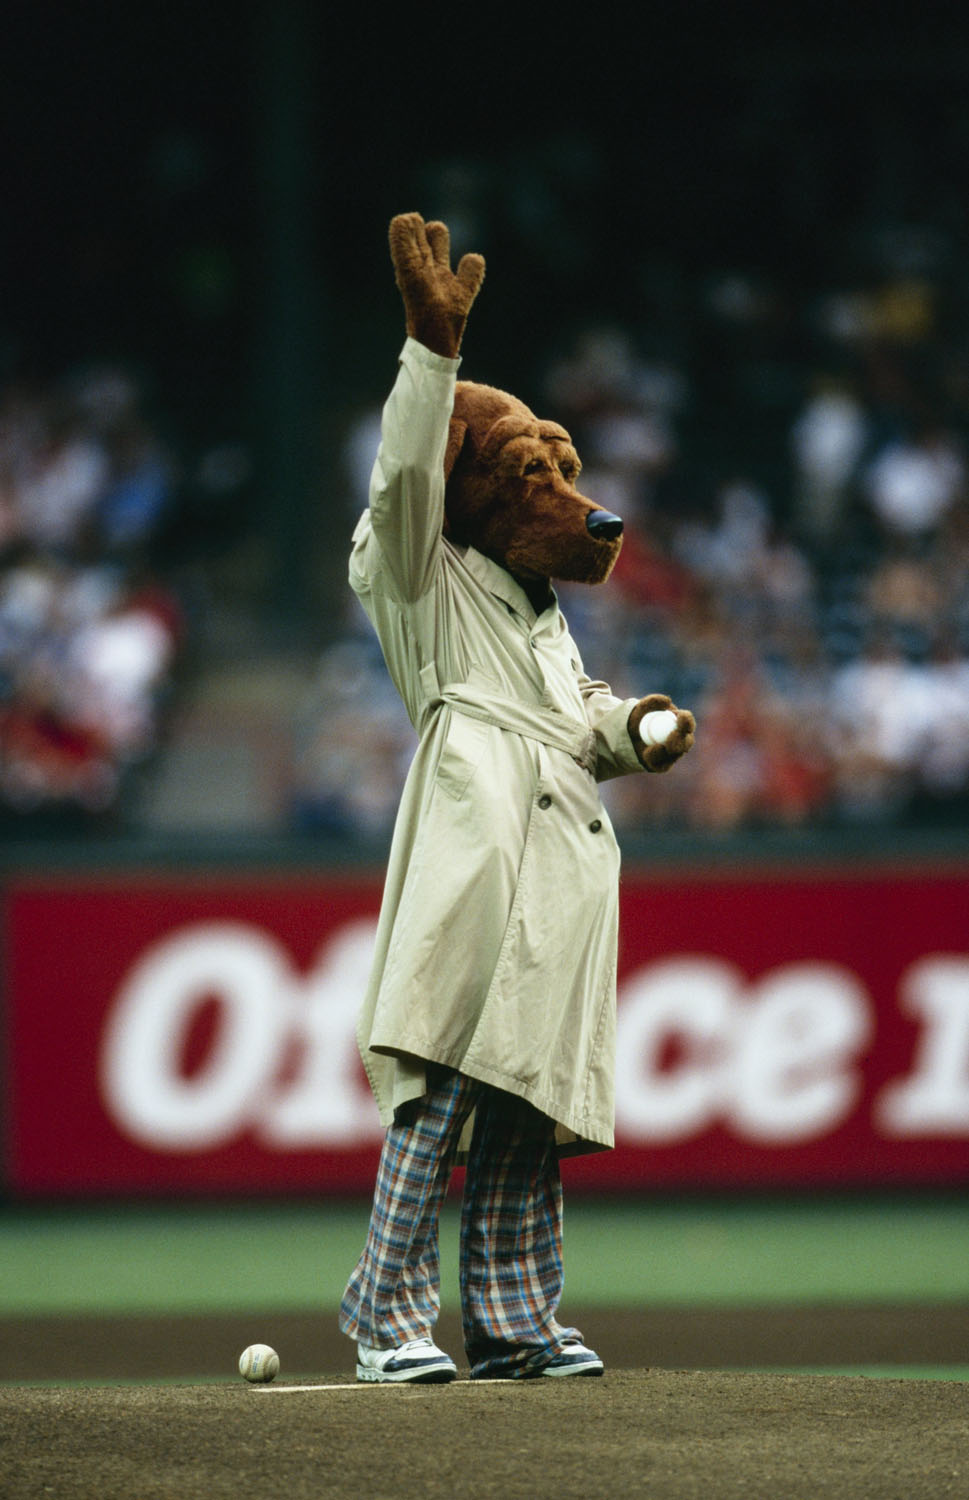 McGruff the Crime Dog throws out the first pitch before the Toronto Blue Jays game against the Texas Rangers at The Ballpark in Arlington on August 4, 1998 in Arlington, Texas.